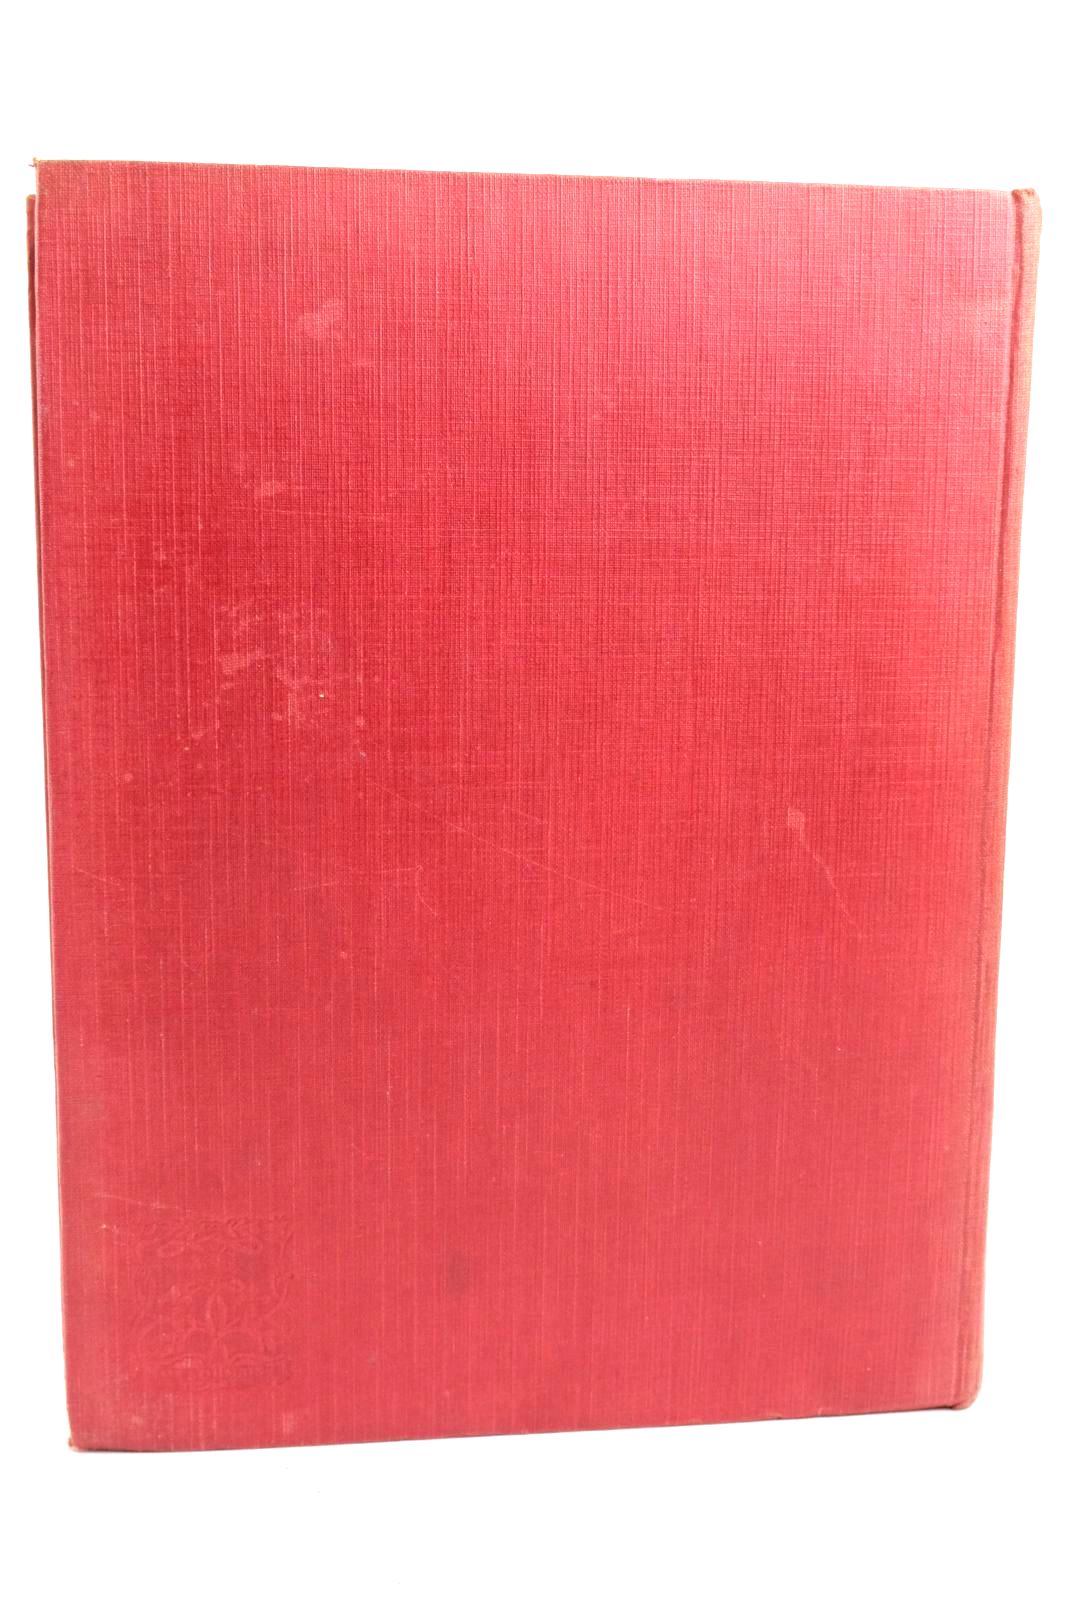 Photo of THE SONGS AND SONNETS OF WILLIAM SHAKESPEARE written by Shakespeare, William illustrated by Robinson, Charles published by Duckworth & Co. (STOCK CODE: 1322269)  for sale by Stella & Rose's Books